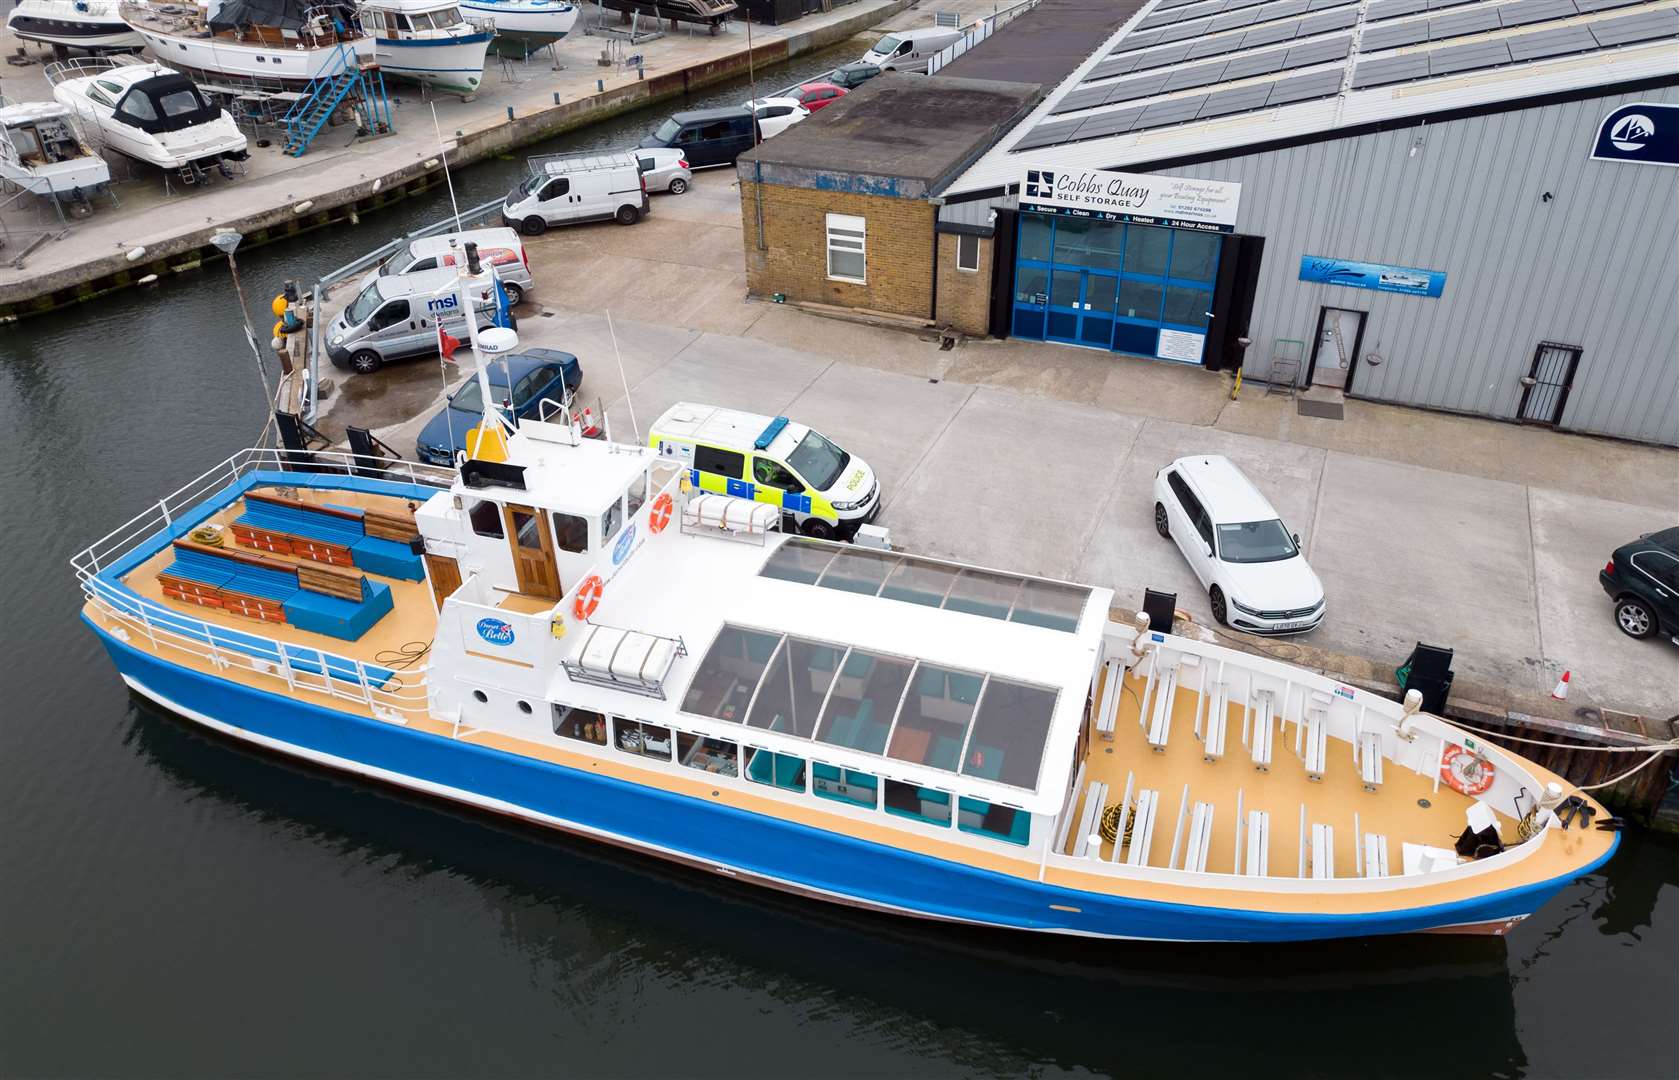 The cruise boat Dorset Belle was impounded following the incident (Andrew Matthews/PA)